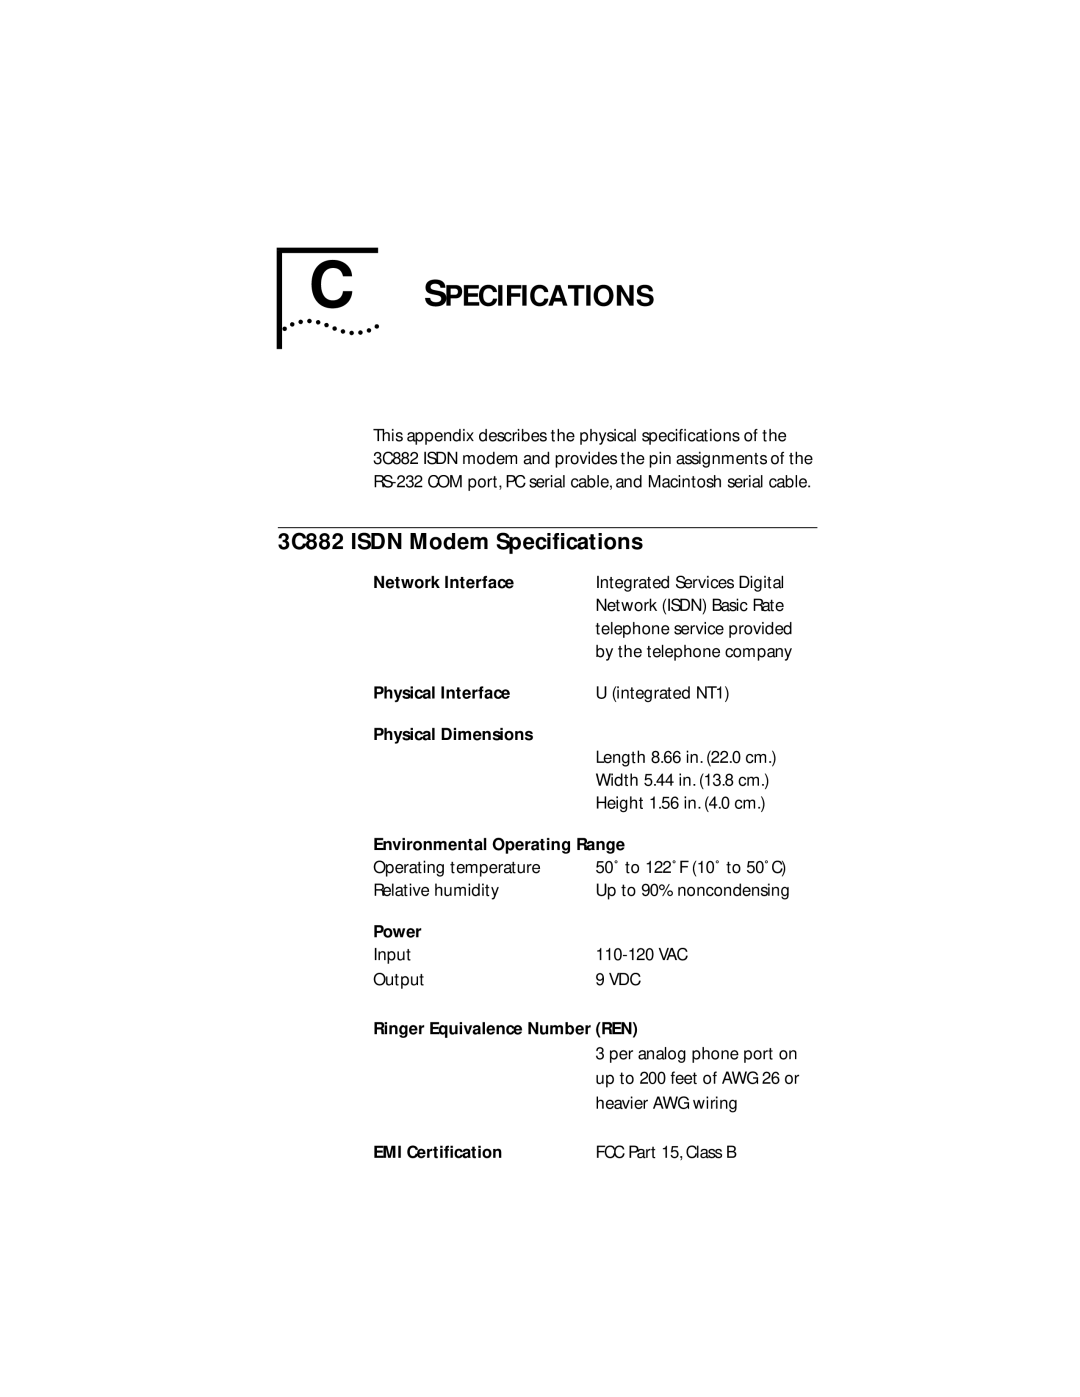 3Com manual Specifications, 3C882 Isdn Modem Speciﬁcations 